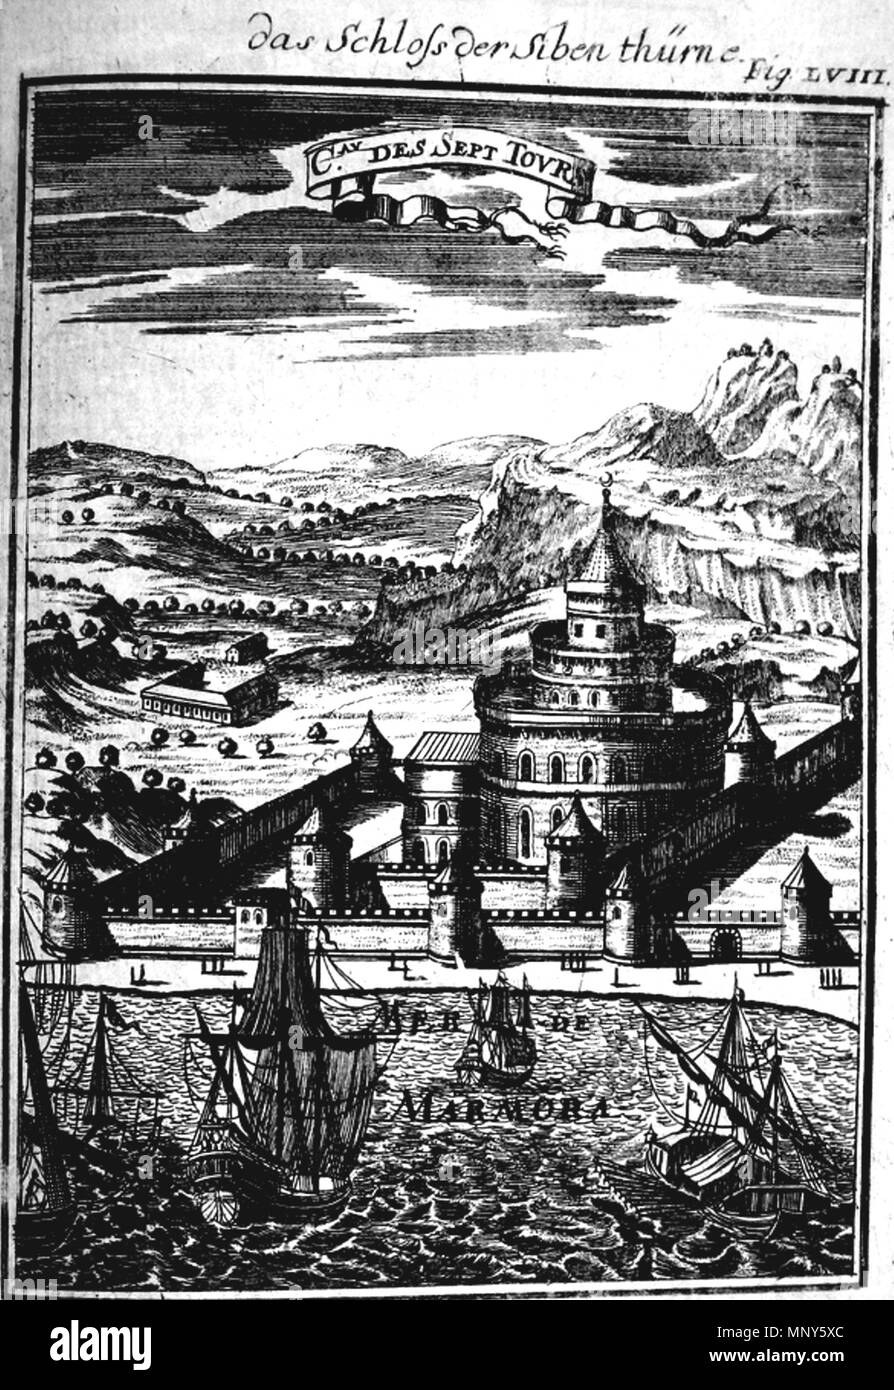 . View of the Castle of Seven Towers, Description de L'Universe (Alain Manesson Mallet, 1685) . 6 May 2007, 04:47:49.   Alain Manesson Mallet  (1630–1706)     Alternative names Allain Manesson-Mallet; Alain Manesson Mallet  Description French cartographer and engineer  Date of birth/death 1630 1706  Location of birth/death Paris Paris  Authority control  : Q362239 VIAF: 19804506 ISNI: 0000 0000 8098 9517 LCCN: n86860220 NLA: 35743812 GND: 128901691 WorldCat 1235 View of the Castle of Seven Towers, Description de L'Universe (Alain Manesson Mallet, 1685) Stock Photo